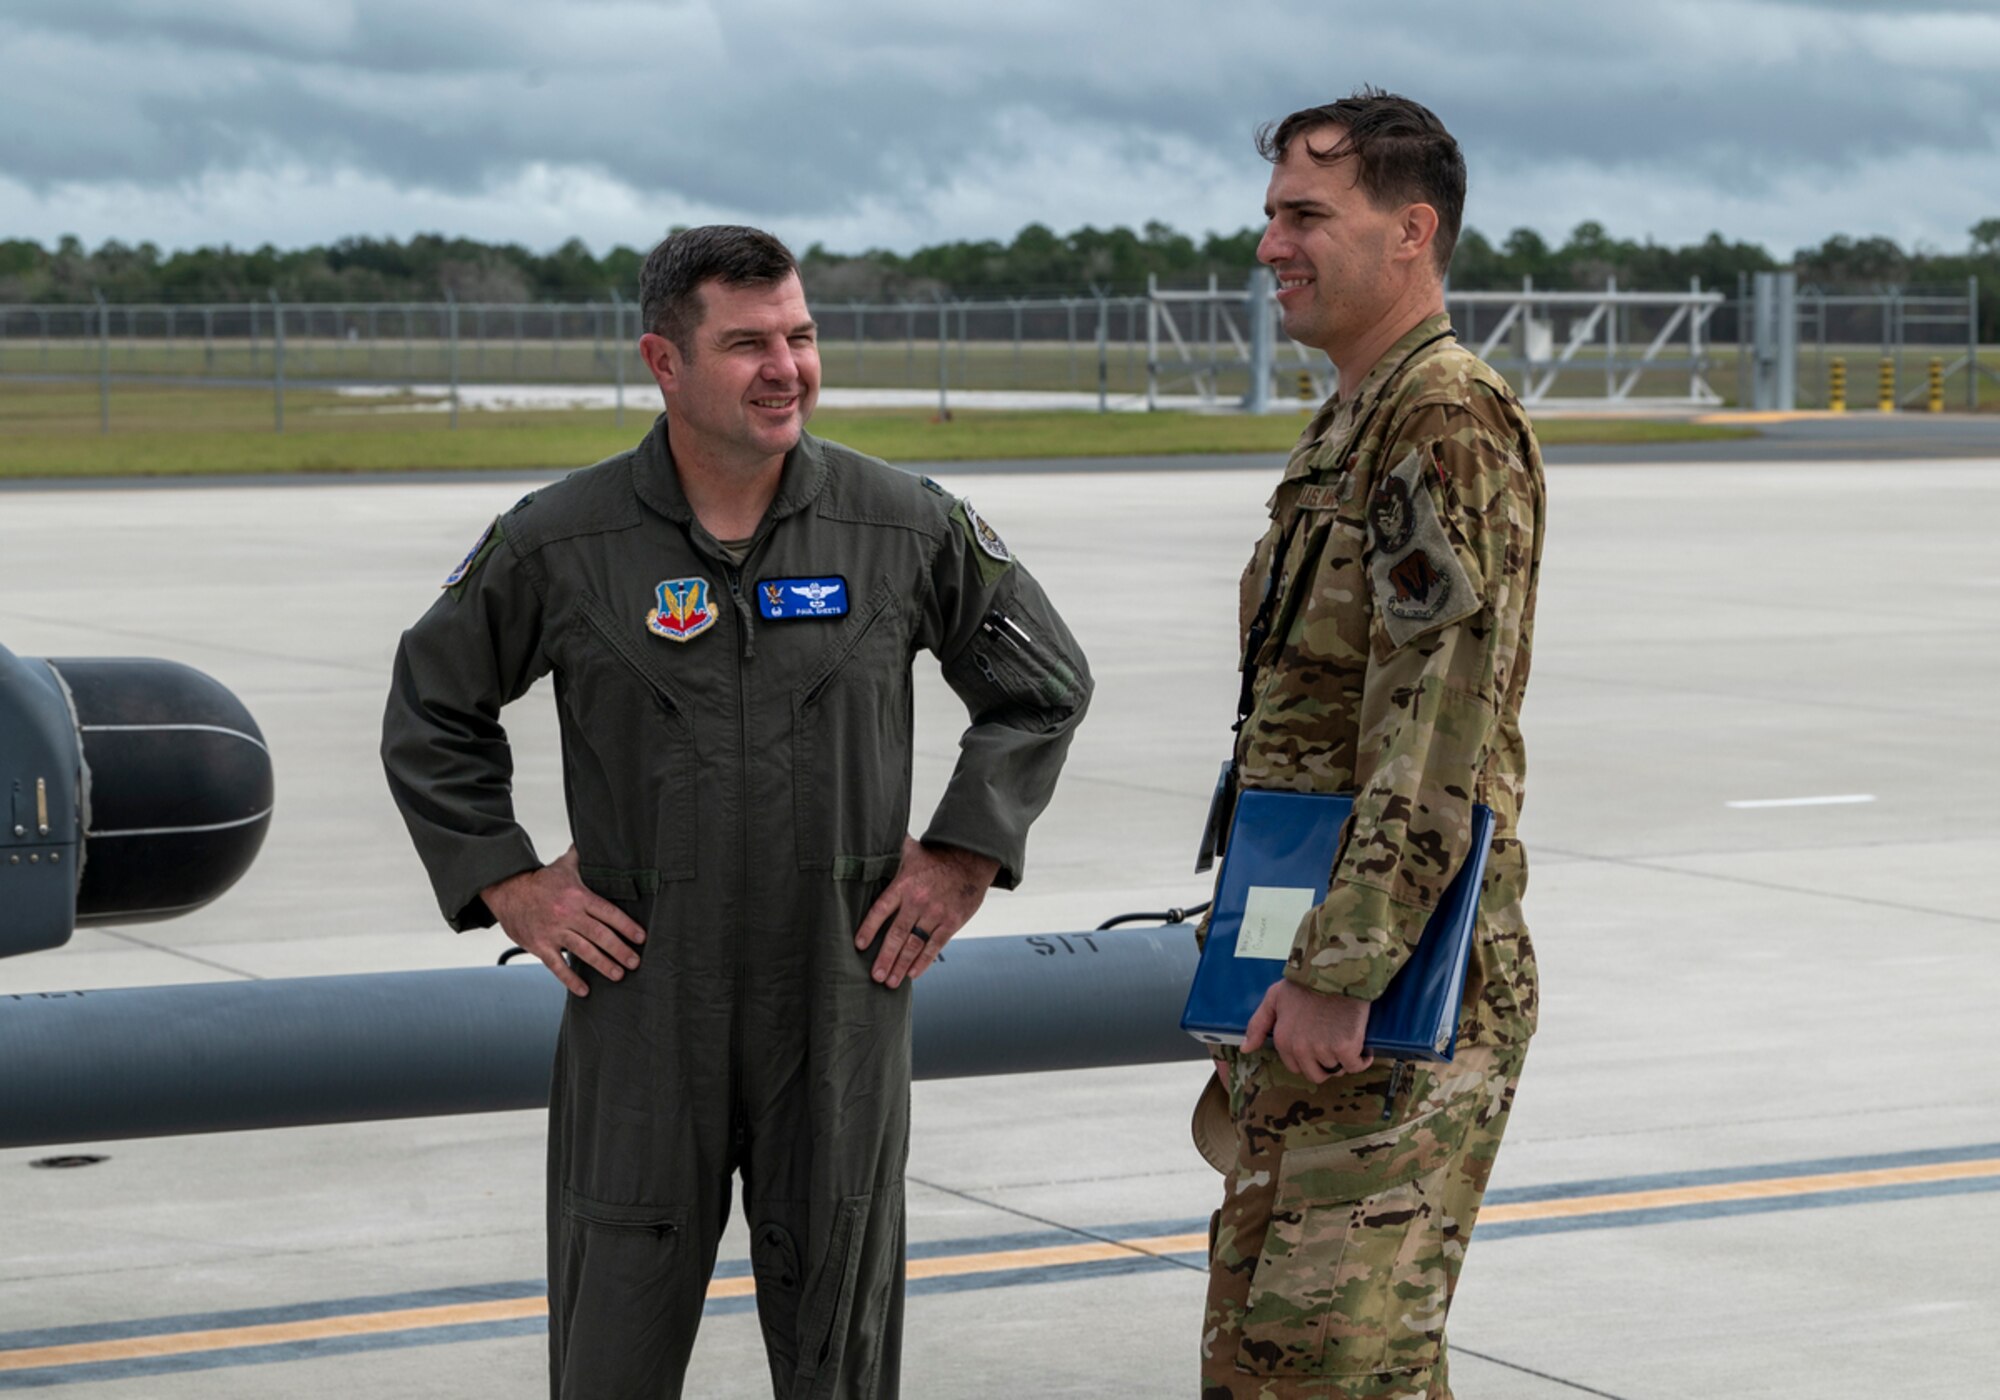 U.S. Air Force Col. Paul Sheets, 23rd Wing commander, left, talks with U.S. Air Force Maj. Benjamin Gransee, 23rd Wing director of inspections, during Mosaic Tiger 24-1 at Avon Park Air Force Range, Florida, Nov. 16, 2023. Gransee led a group of observers tasked with evaluating the exercise participants performance at the simulated contingency location. (U.S. Air Force photo by Airman 1st Class Leonid Soubbotine)